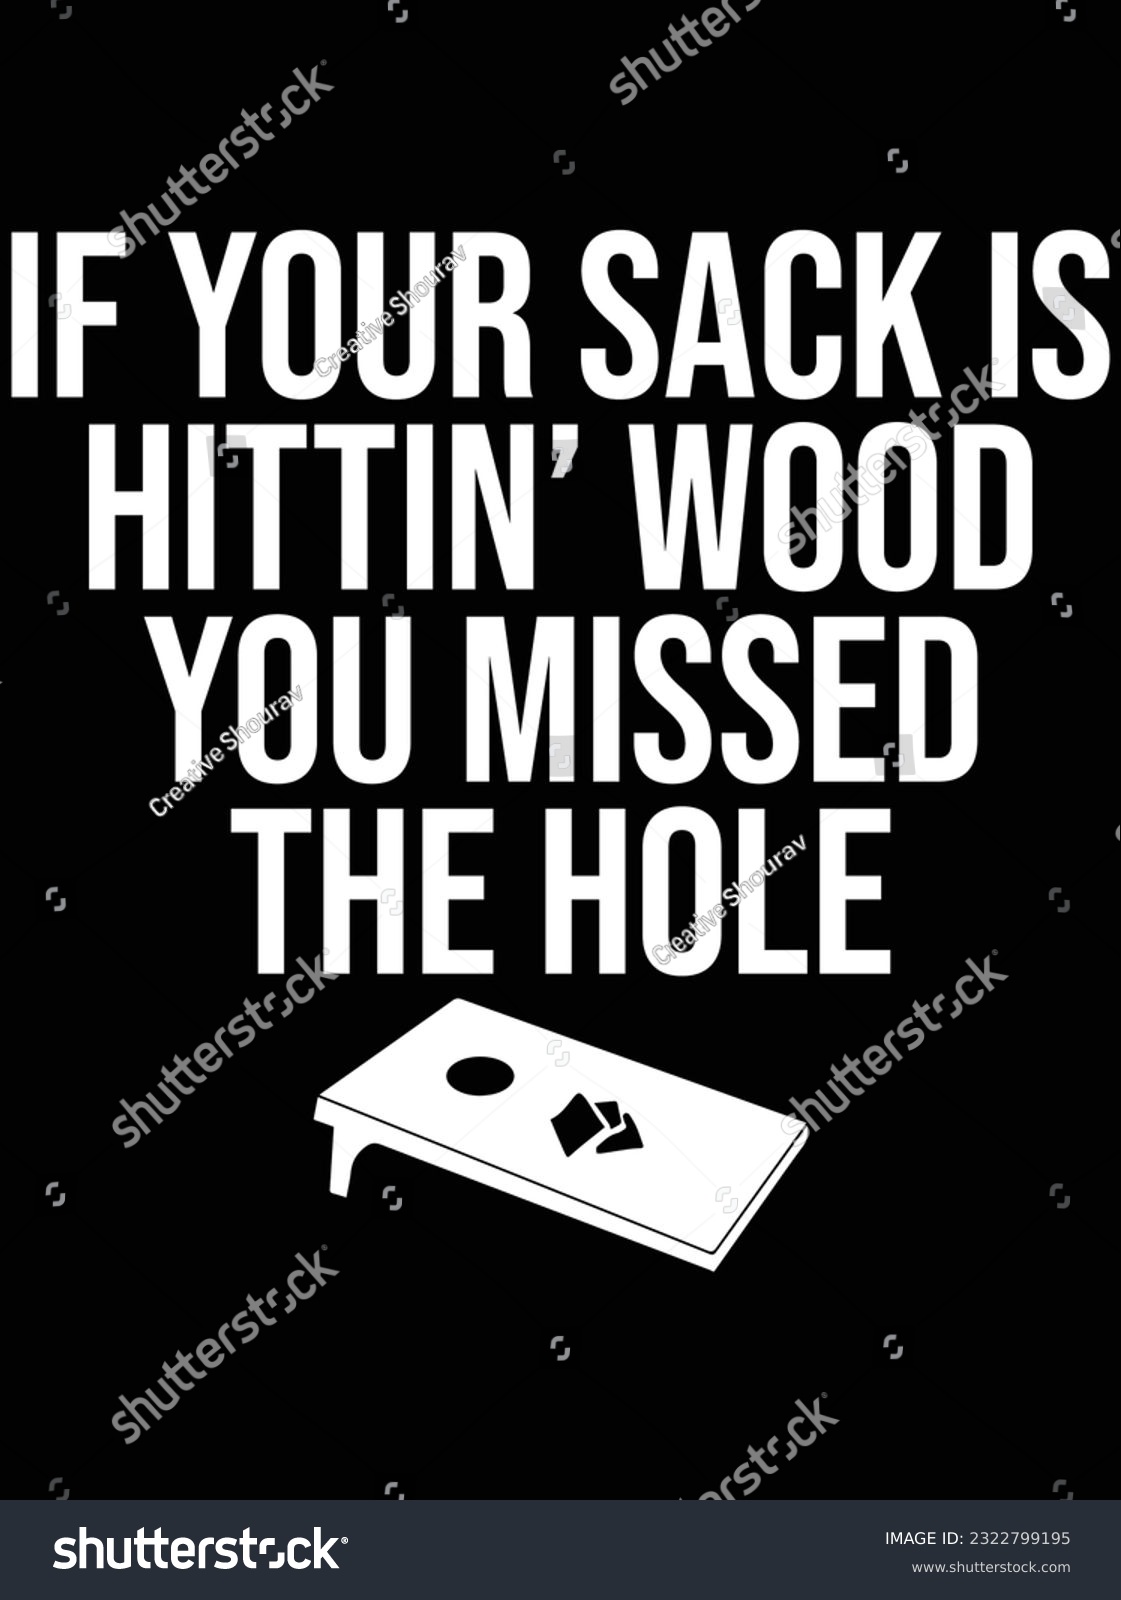 SVG of If your sack is hitting wood you missed the hole design vector art design, eps file. design file for t-shirt. SVG, EPS cuttable design file svg